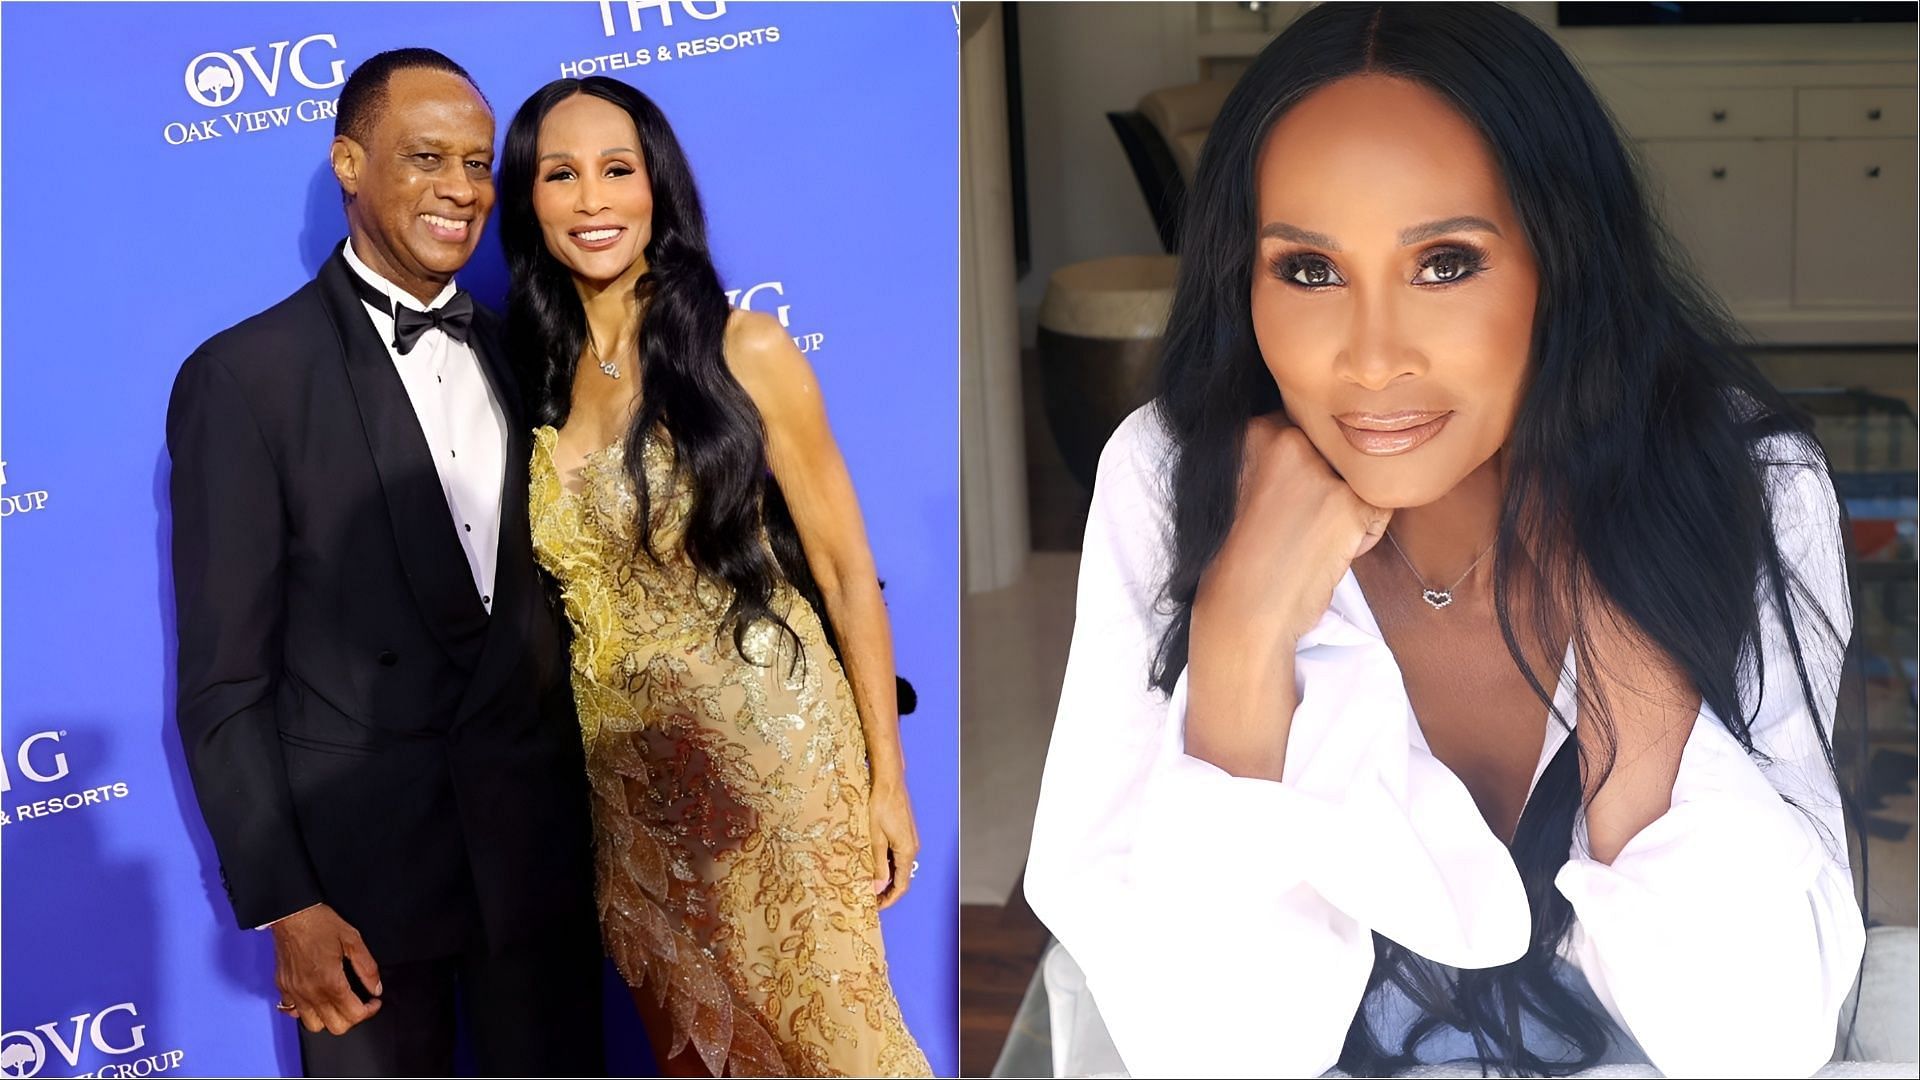 Beverly Johnson and Brian Maillian tied the knot in a secret ceremony (Image via Getty Images and Instagram/@iambeverlyjohnson)